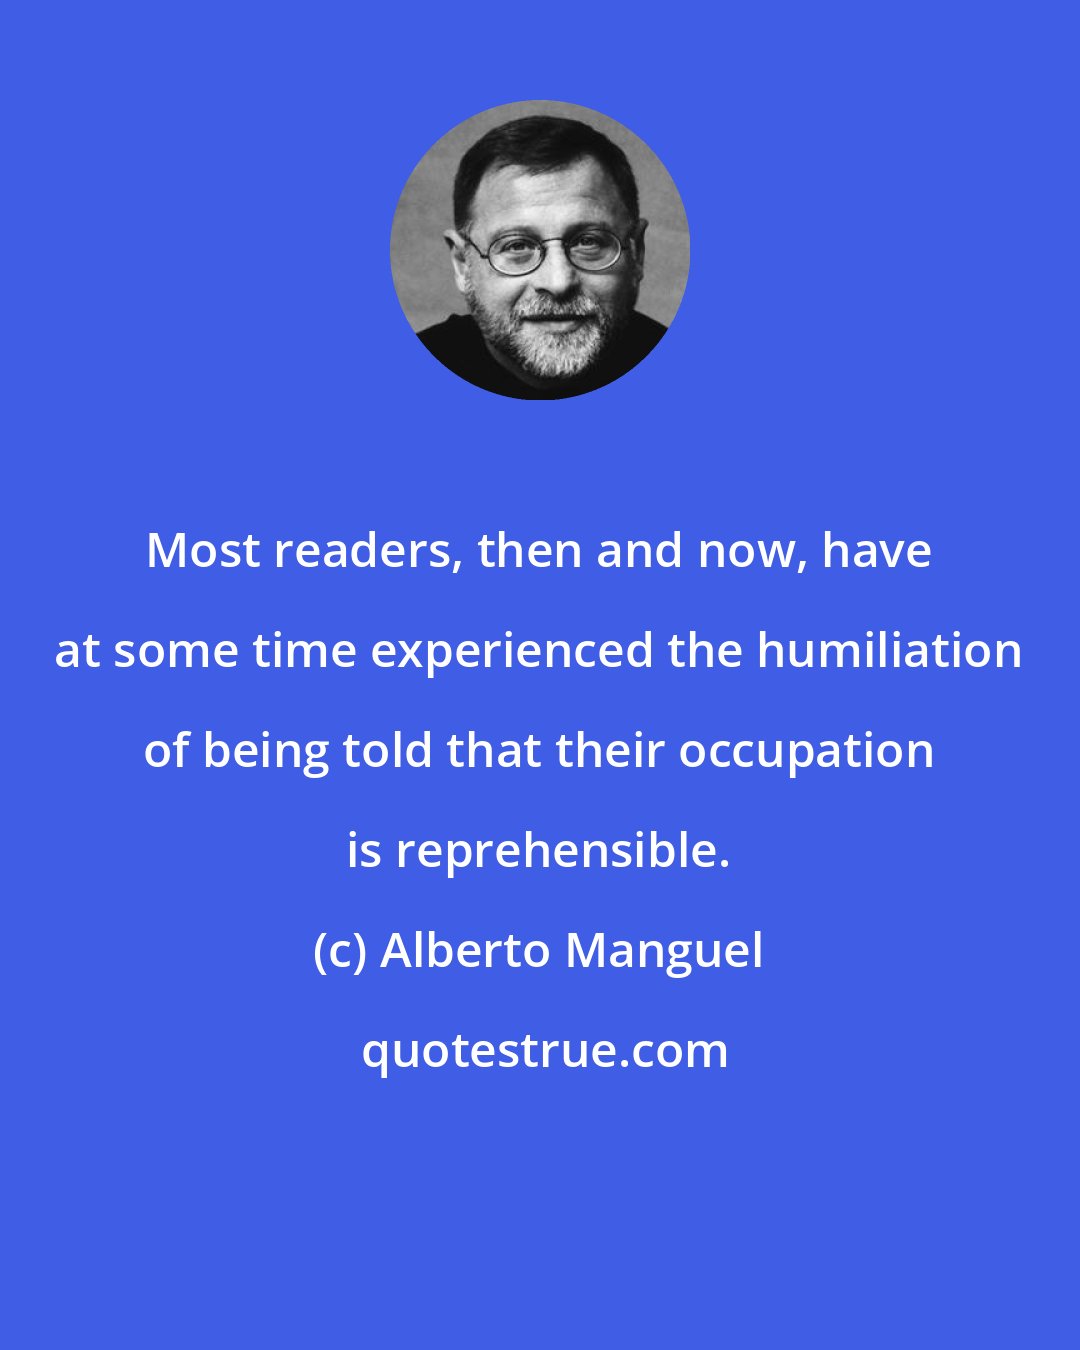 Alberto Manguel: Most readers, then and now, have at some time experienced the humiliation of being told that their occupation is reprehensible.